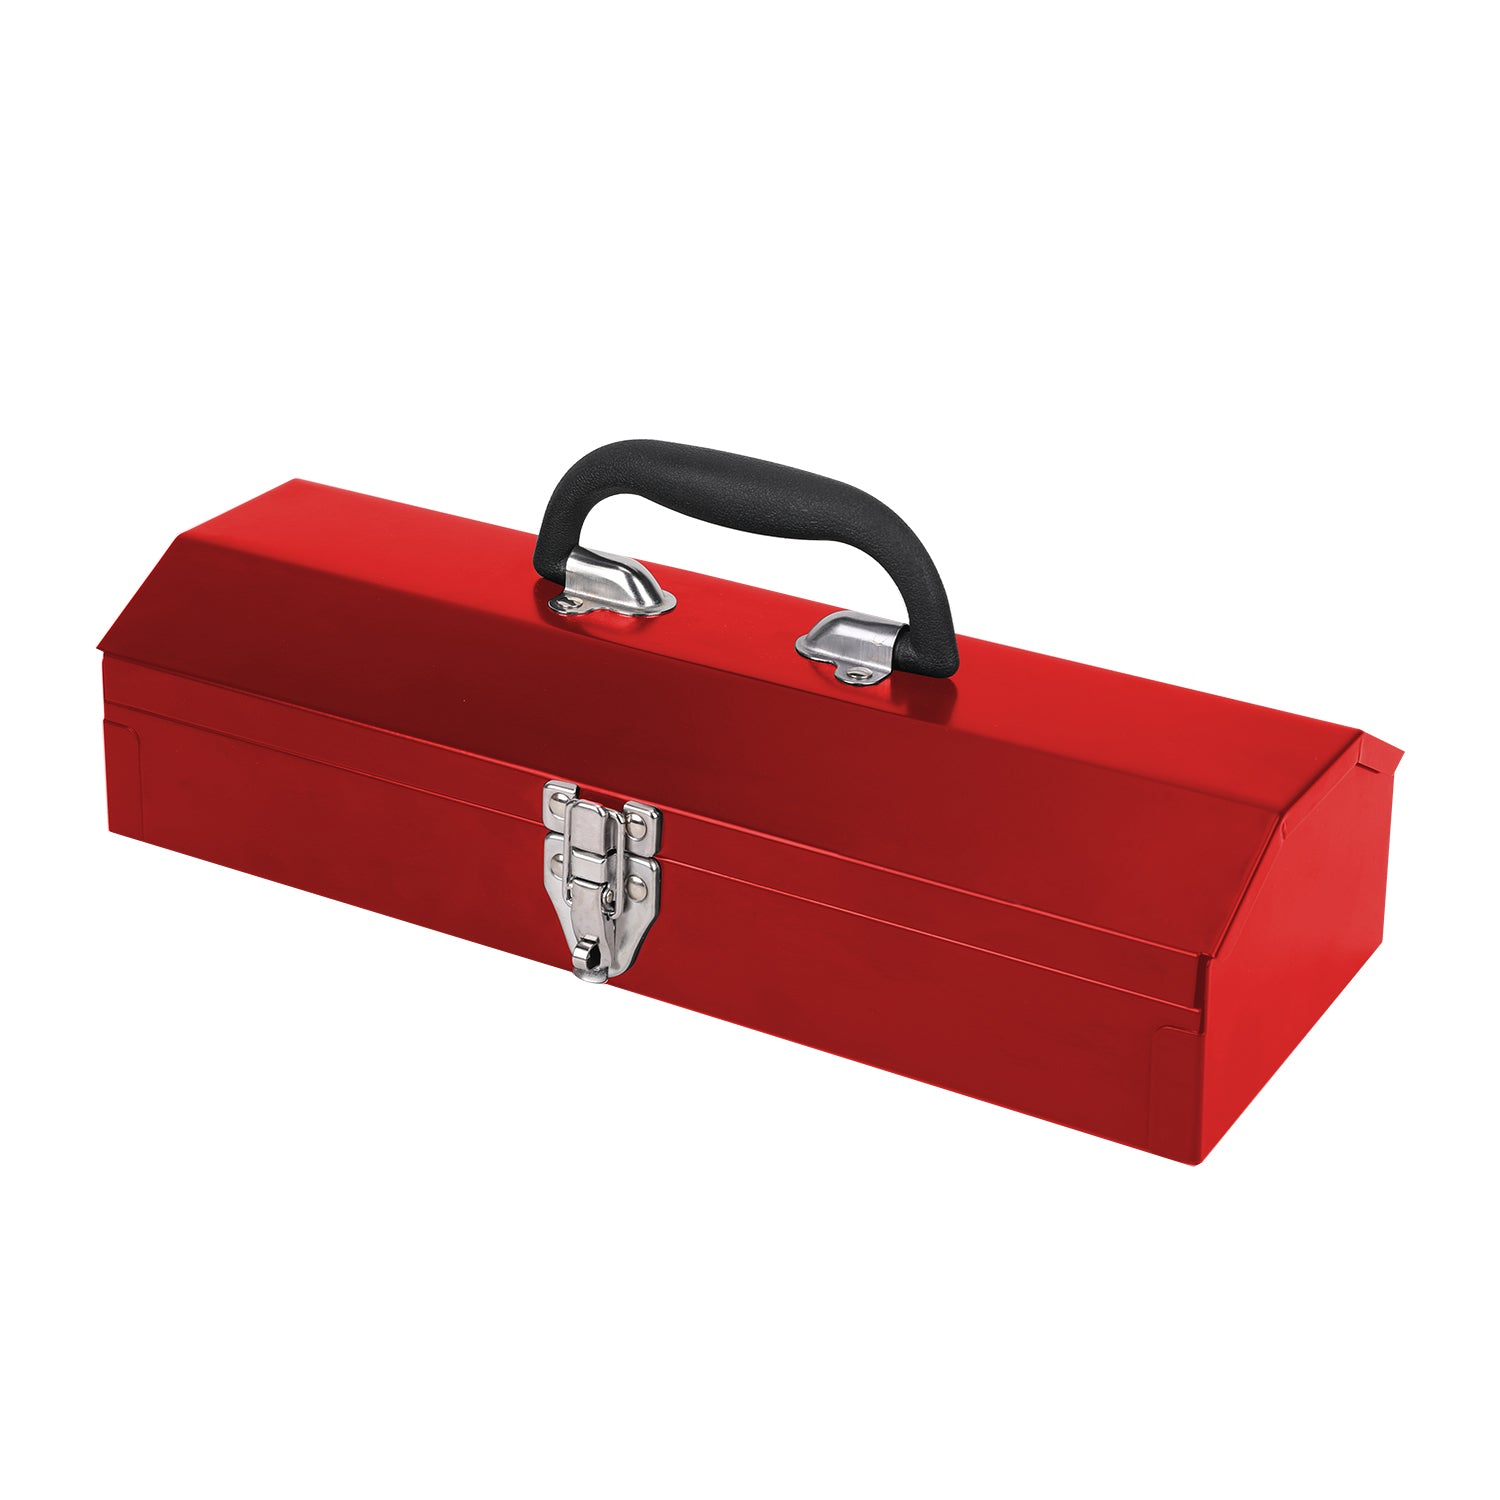 15 Red Tool Box